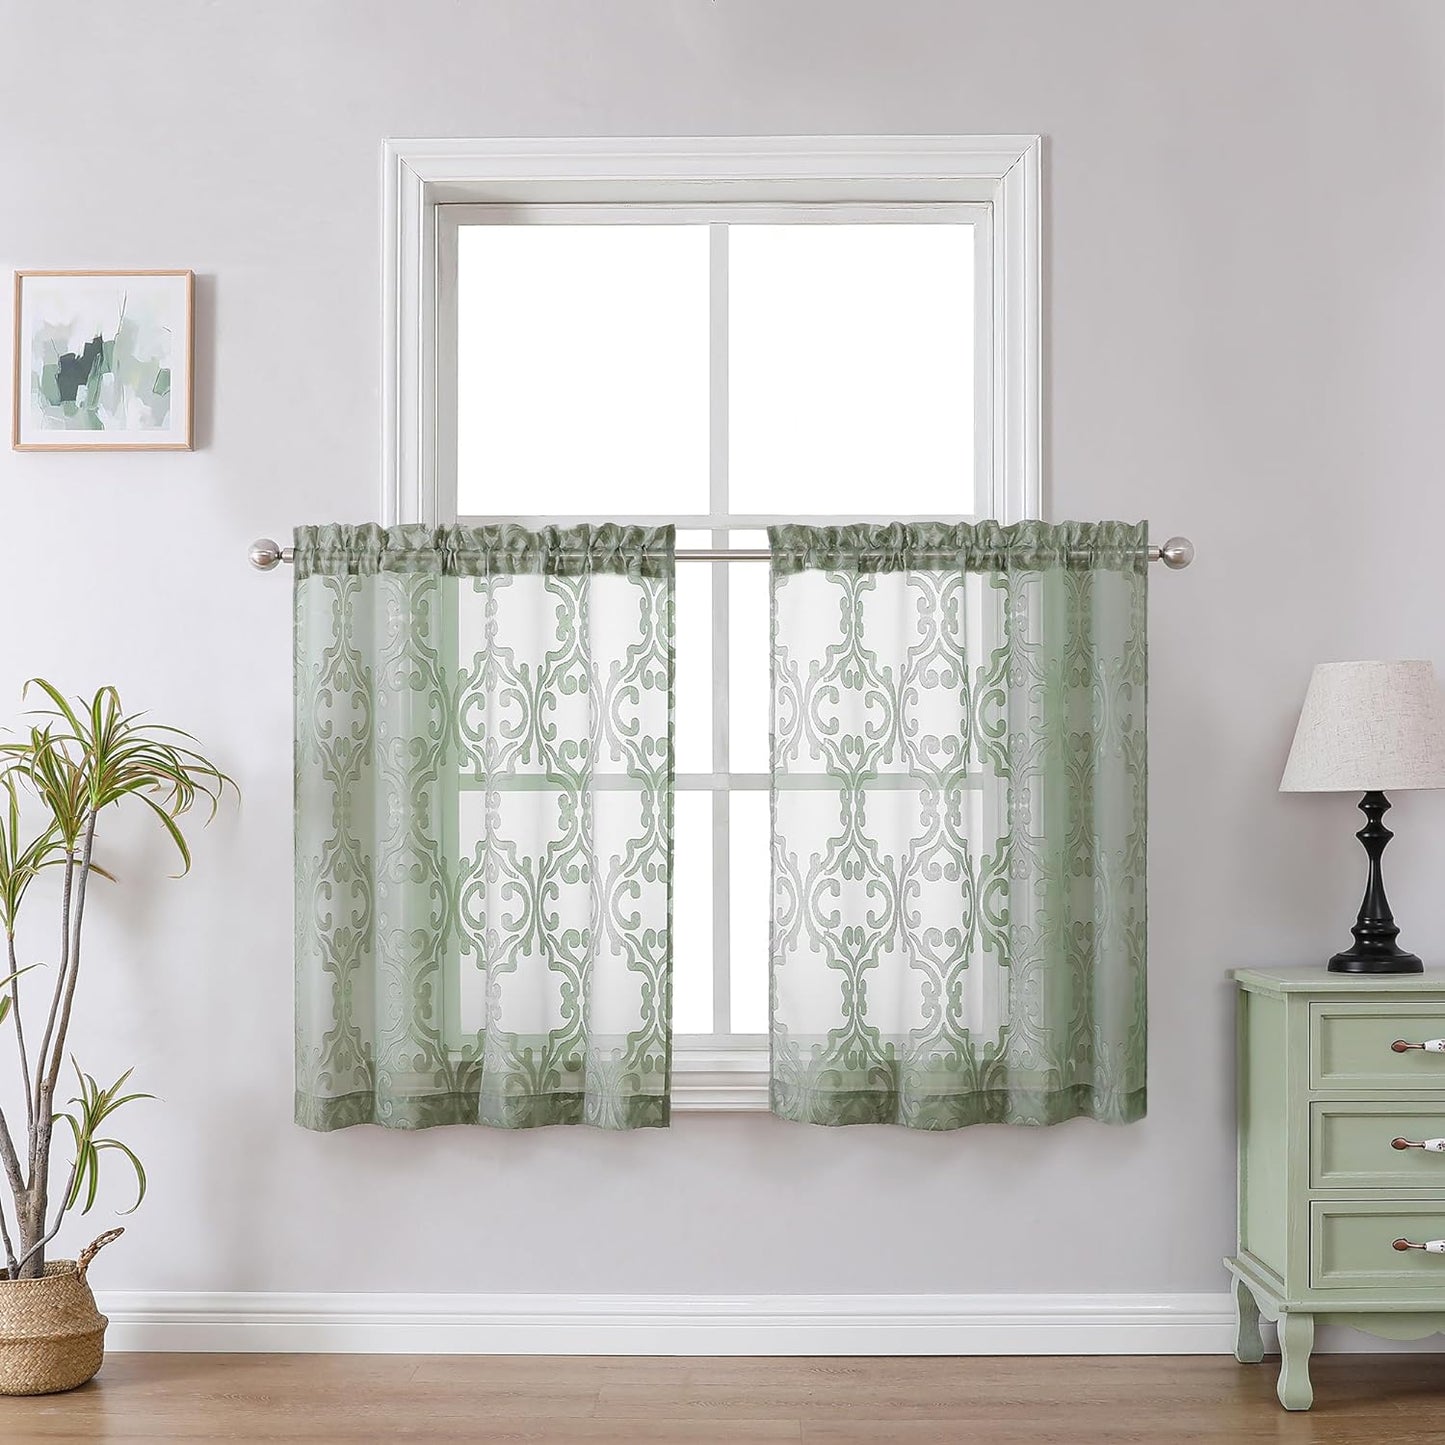 Aiyufeng Suri 2 Panels Sheer Sage Green Curtains 63 Inches Long, Light & Airy Privacy Textured Sheer Drapes, Dual Rod Pocket Voile Clipped Floral Luxury Panels for Bedroom Living Room, 42 X 63 Inch  Aiyufeng Sage Green 2X42X36" 